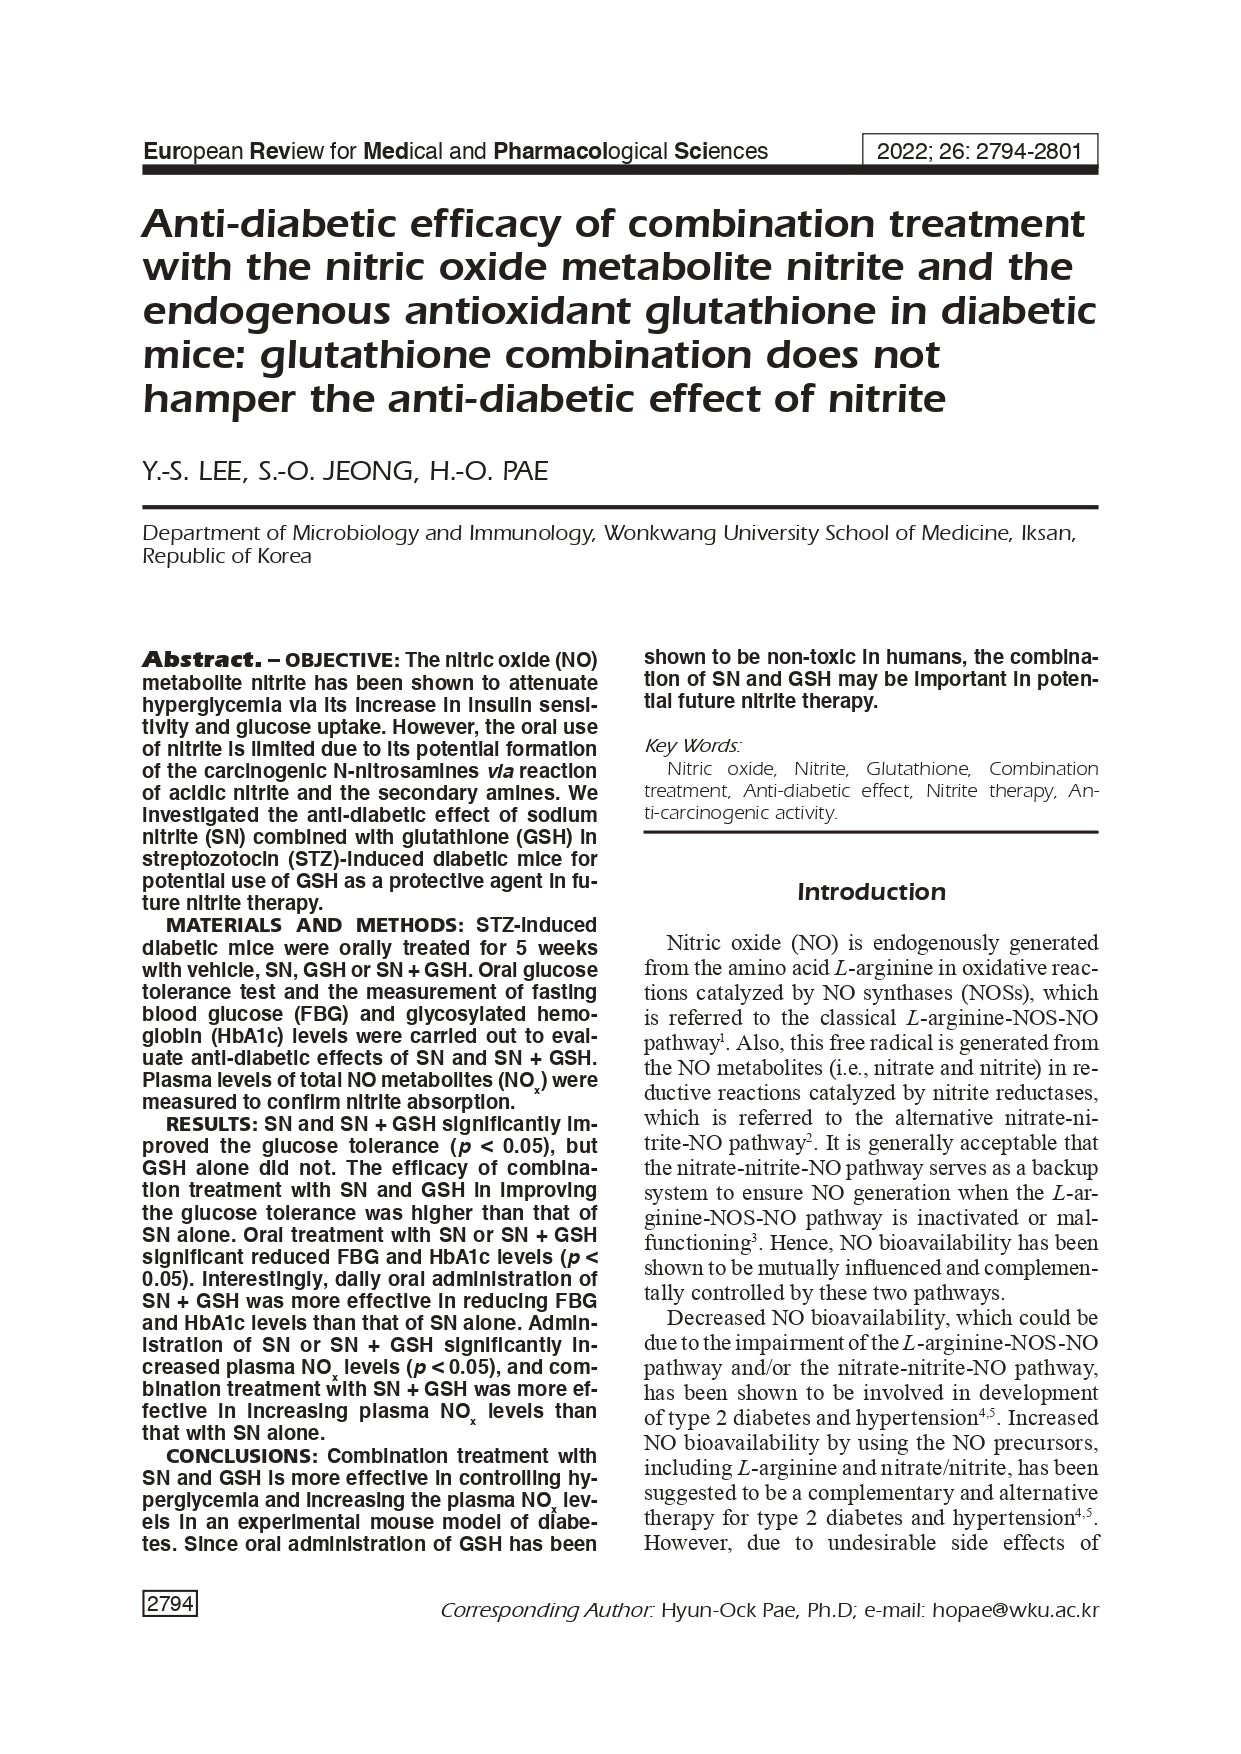 Anti-diabetic_efficacy_of_combination_treatment_with_the_nitric_oxide_metabolite_nitrite_and_the_endogenous_antioxidant_glutathione_in_diabetic_mice_glutathione_combination_does_not